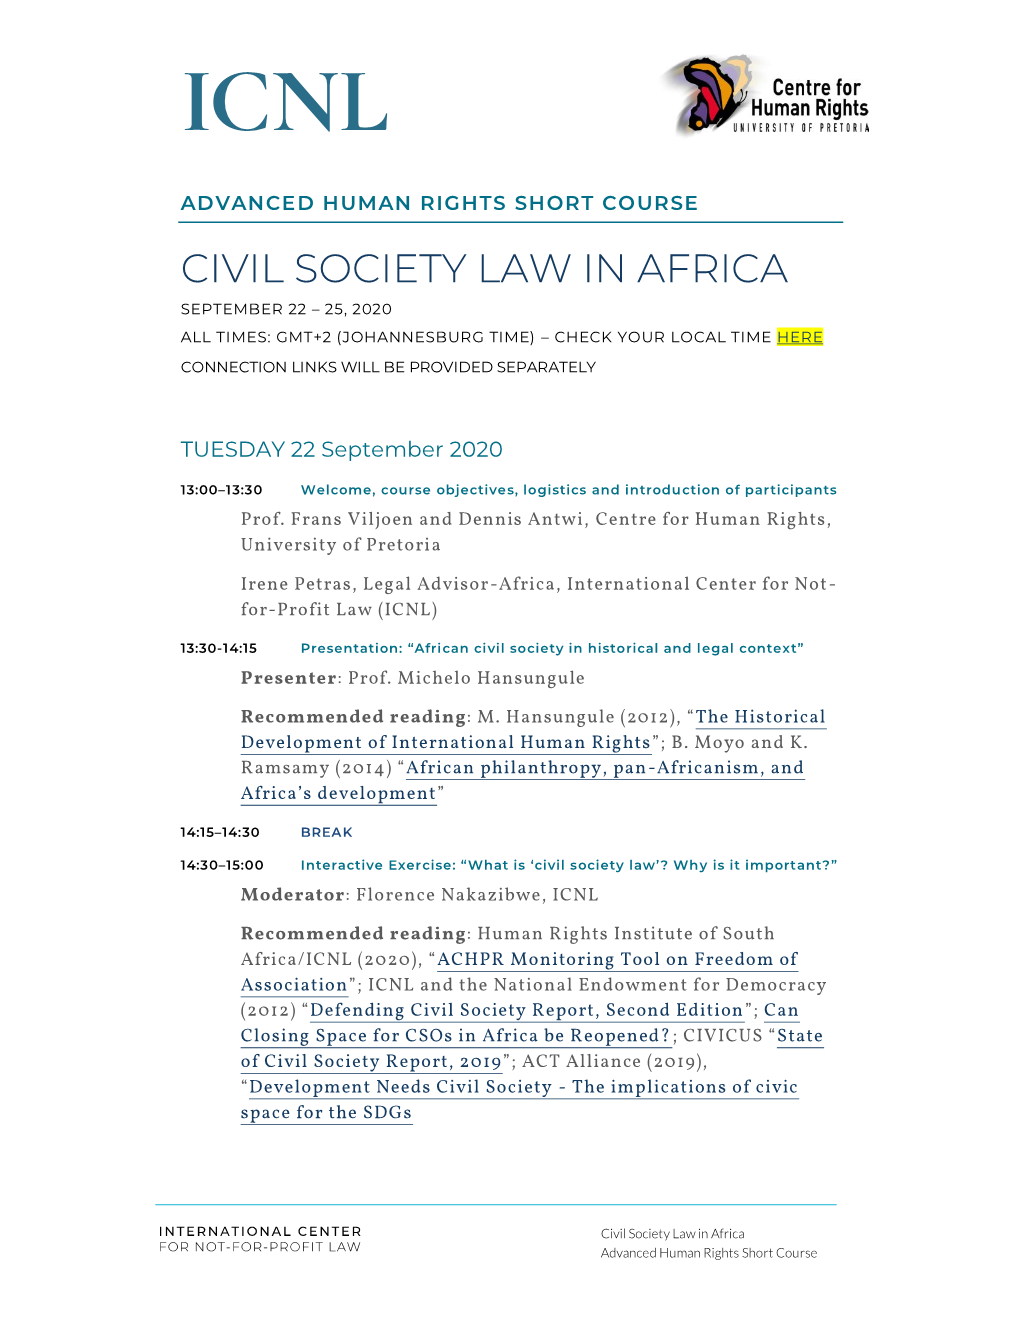 Civil Society Law in Africa September 22 – 25, 2020 All Times: Gmt+2 (Johannesburg Time) – Check Your Local Time Here Connection Links Will Be Provided Separately